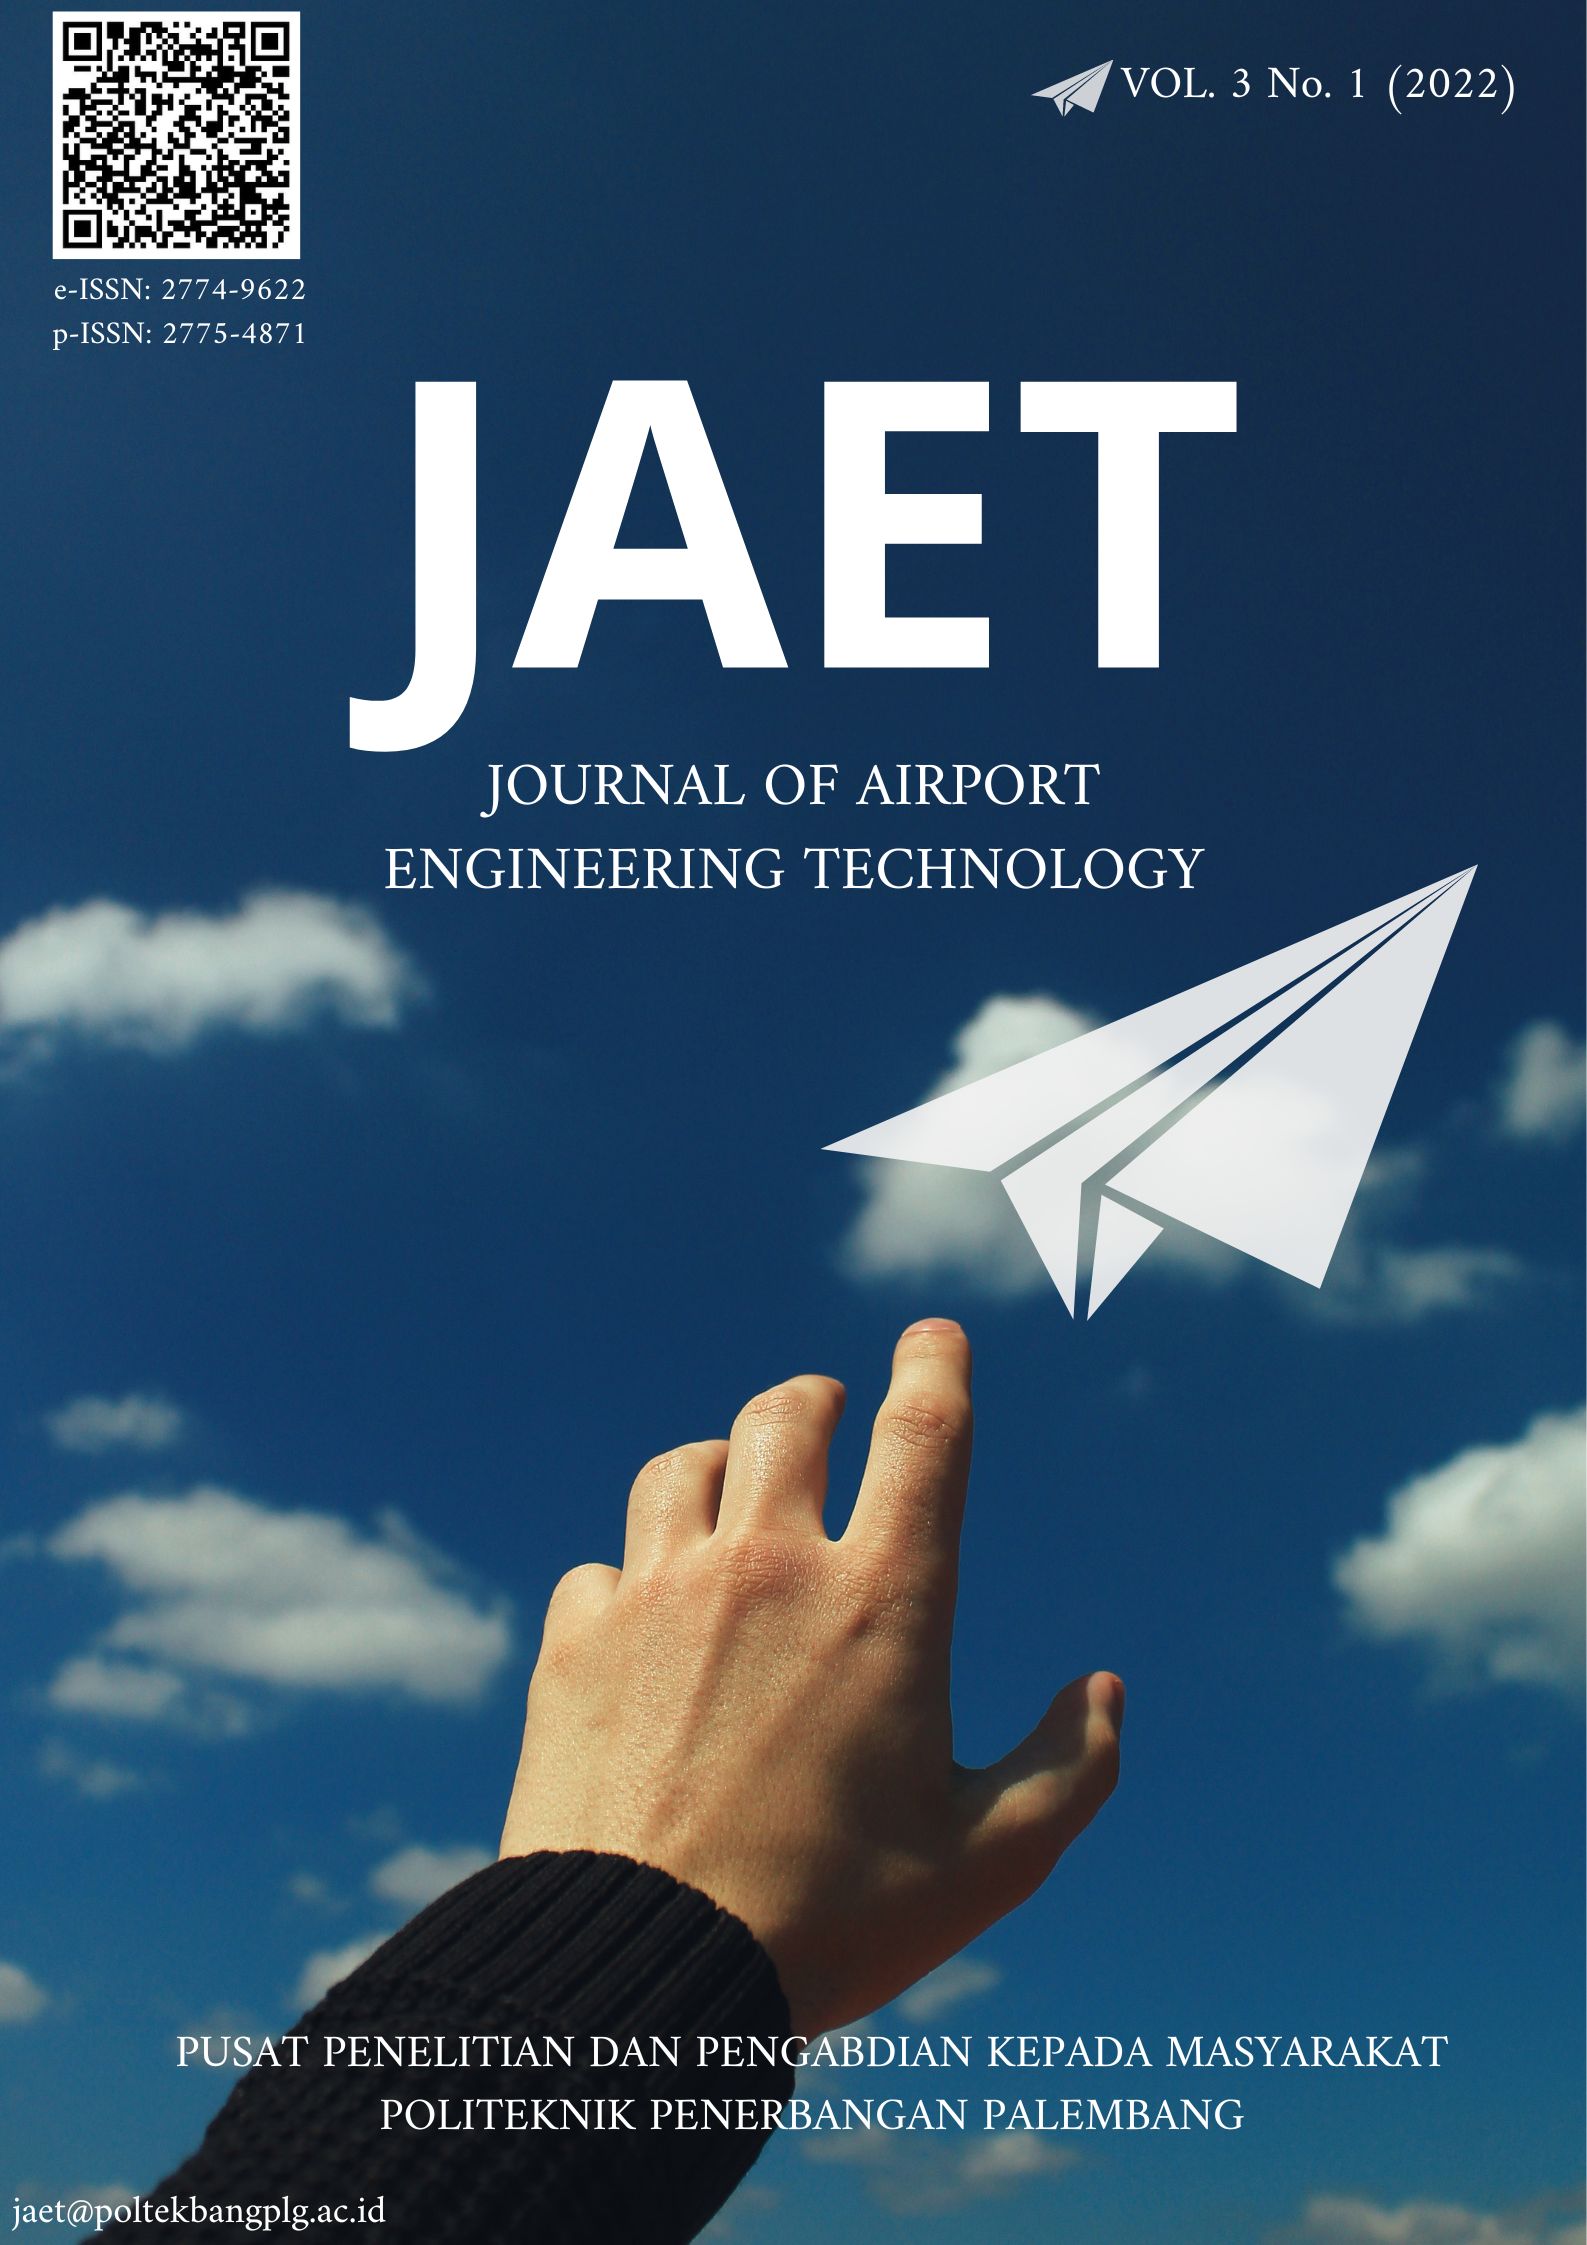 					View Vol. 3 No. 1 (2022): Journal of Airport Engineering Technology (JAET)
				